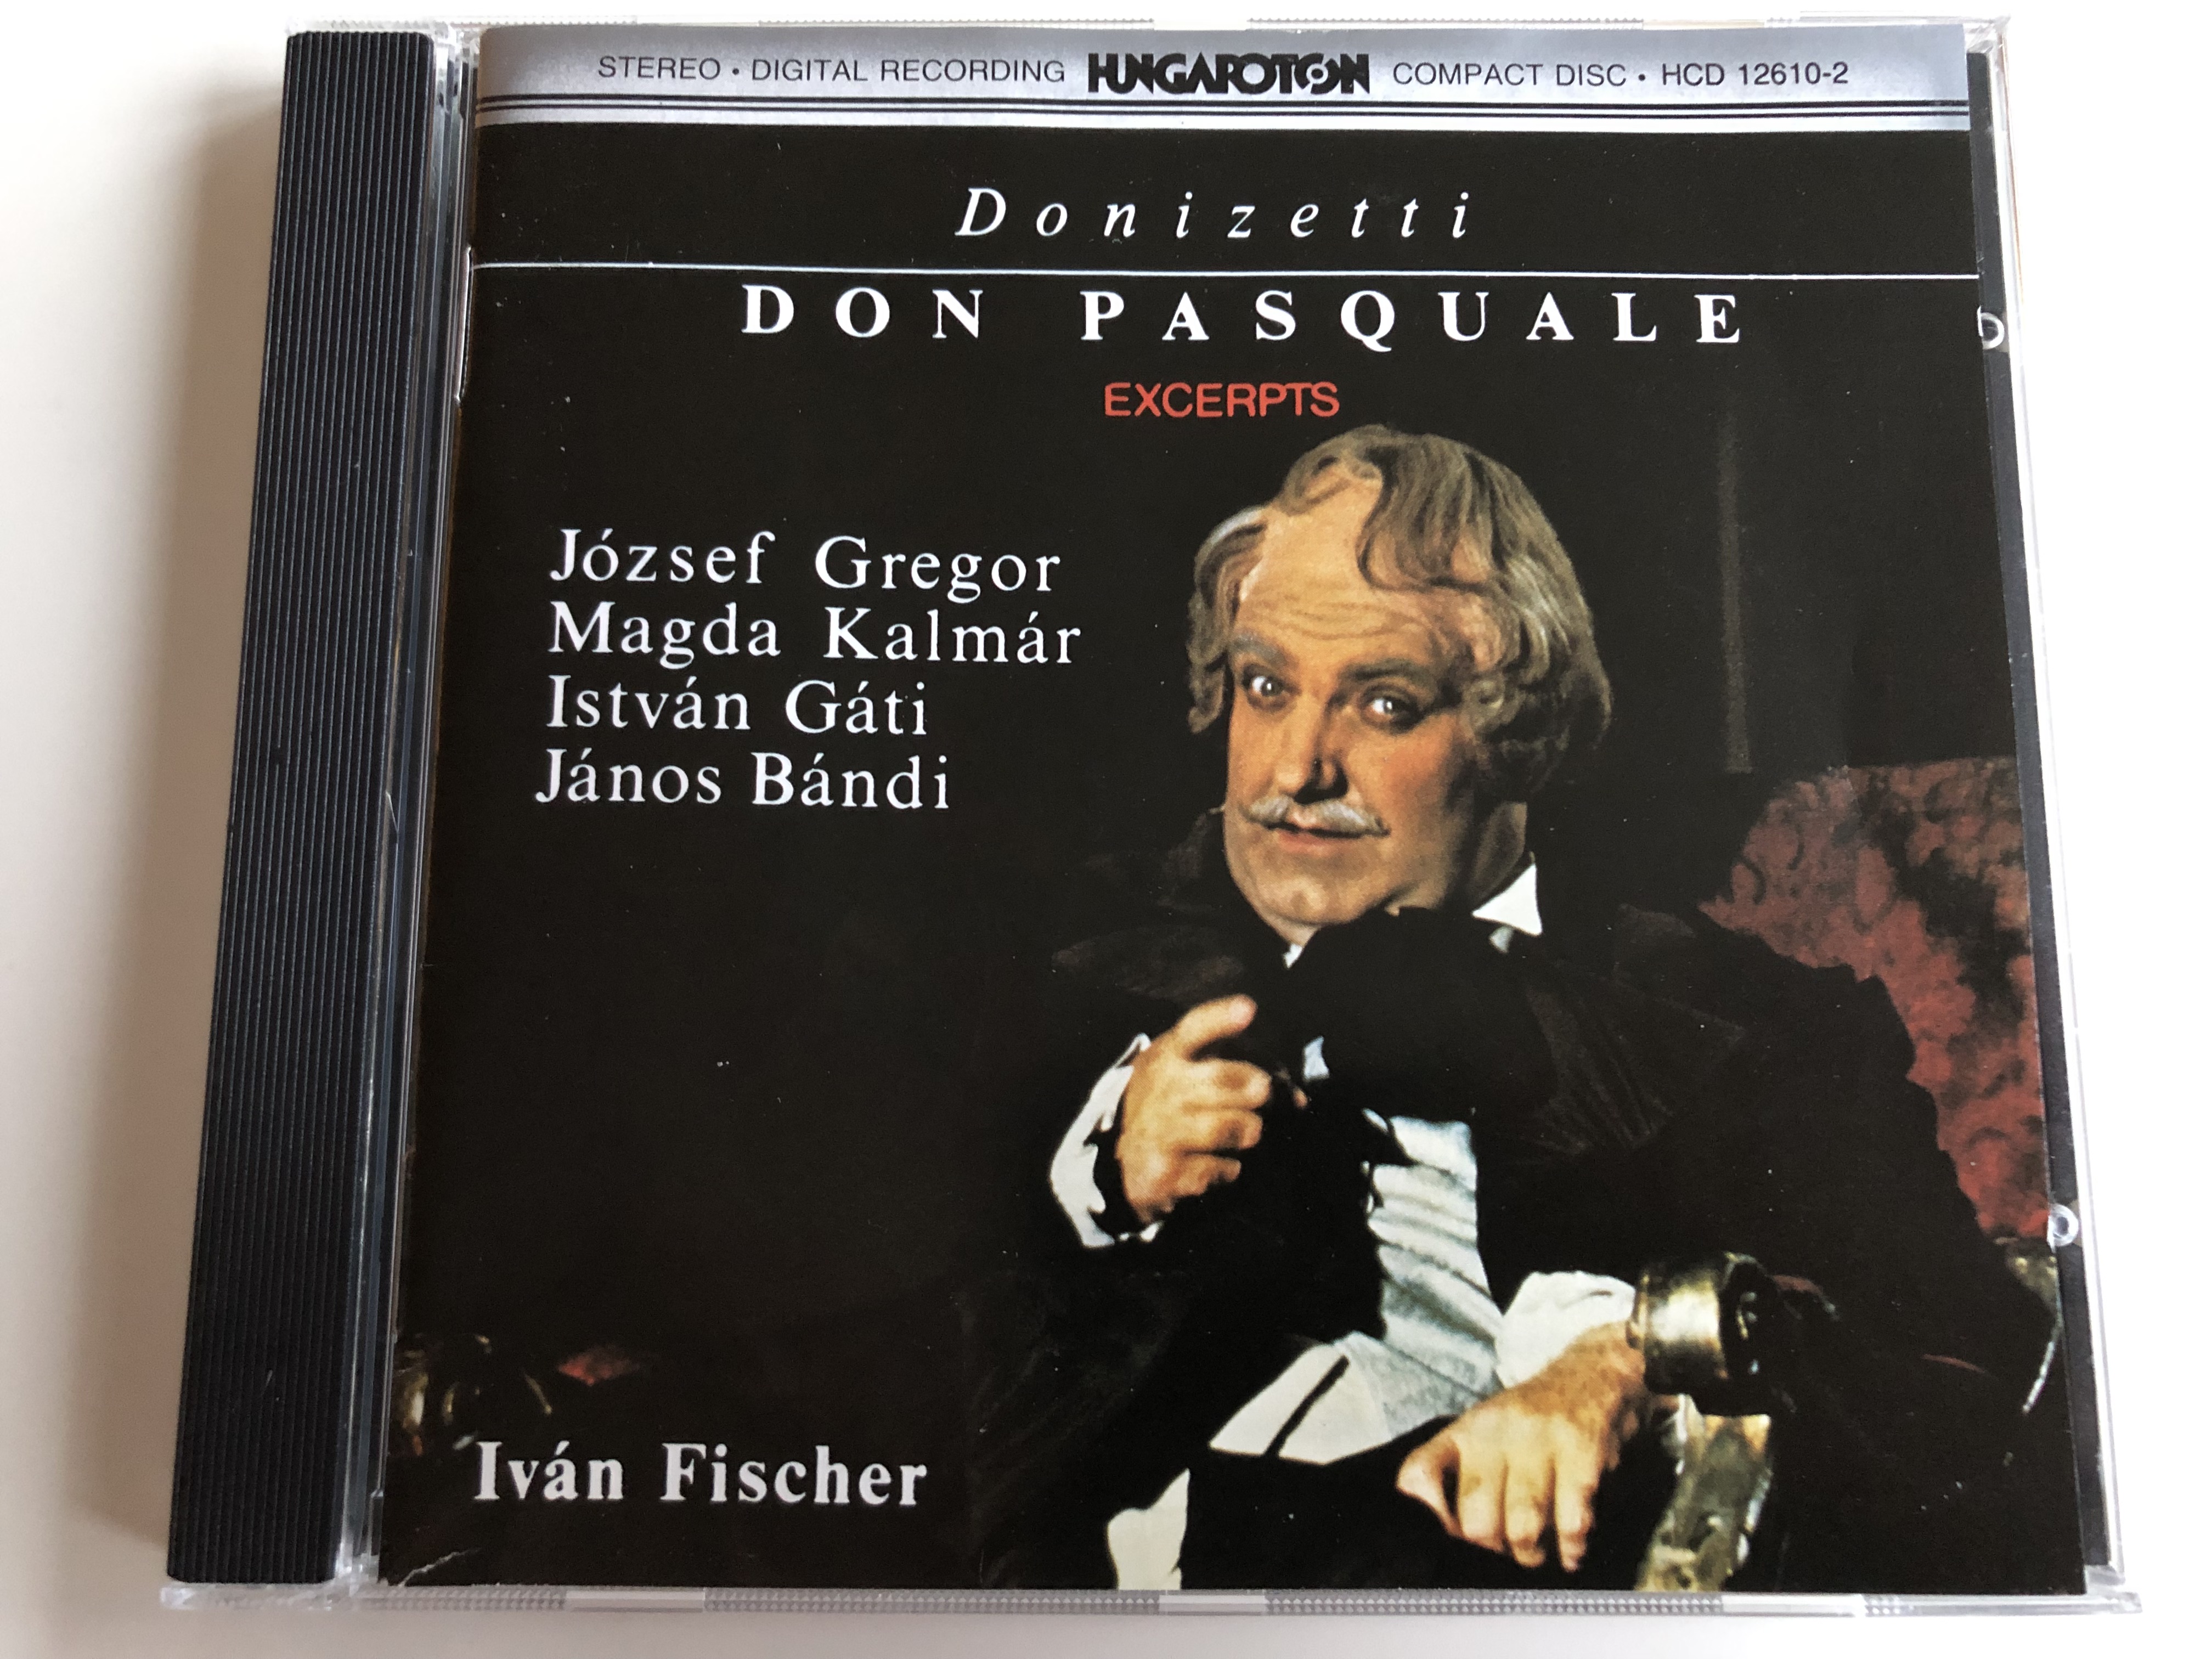 donizetti-don-pasquale-excerpts-j-zsef-gregor-magda-kalm-r-istv-n-g-ti-j-nos-b-ndi-conducted-by-iv-n-fischer-hungaroton-hcd-12610-2-drama-buffo-in-3-acts-1-.jpg